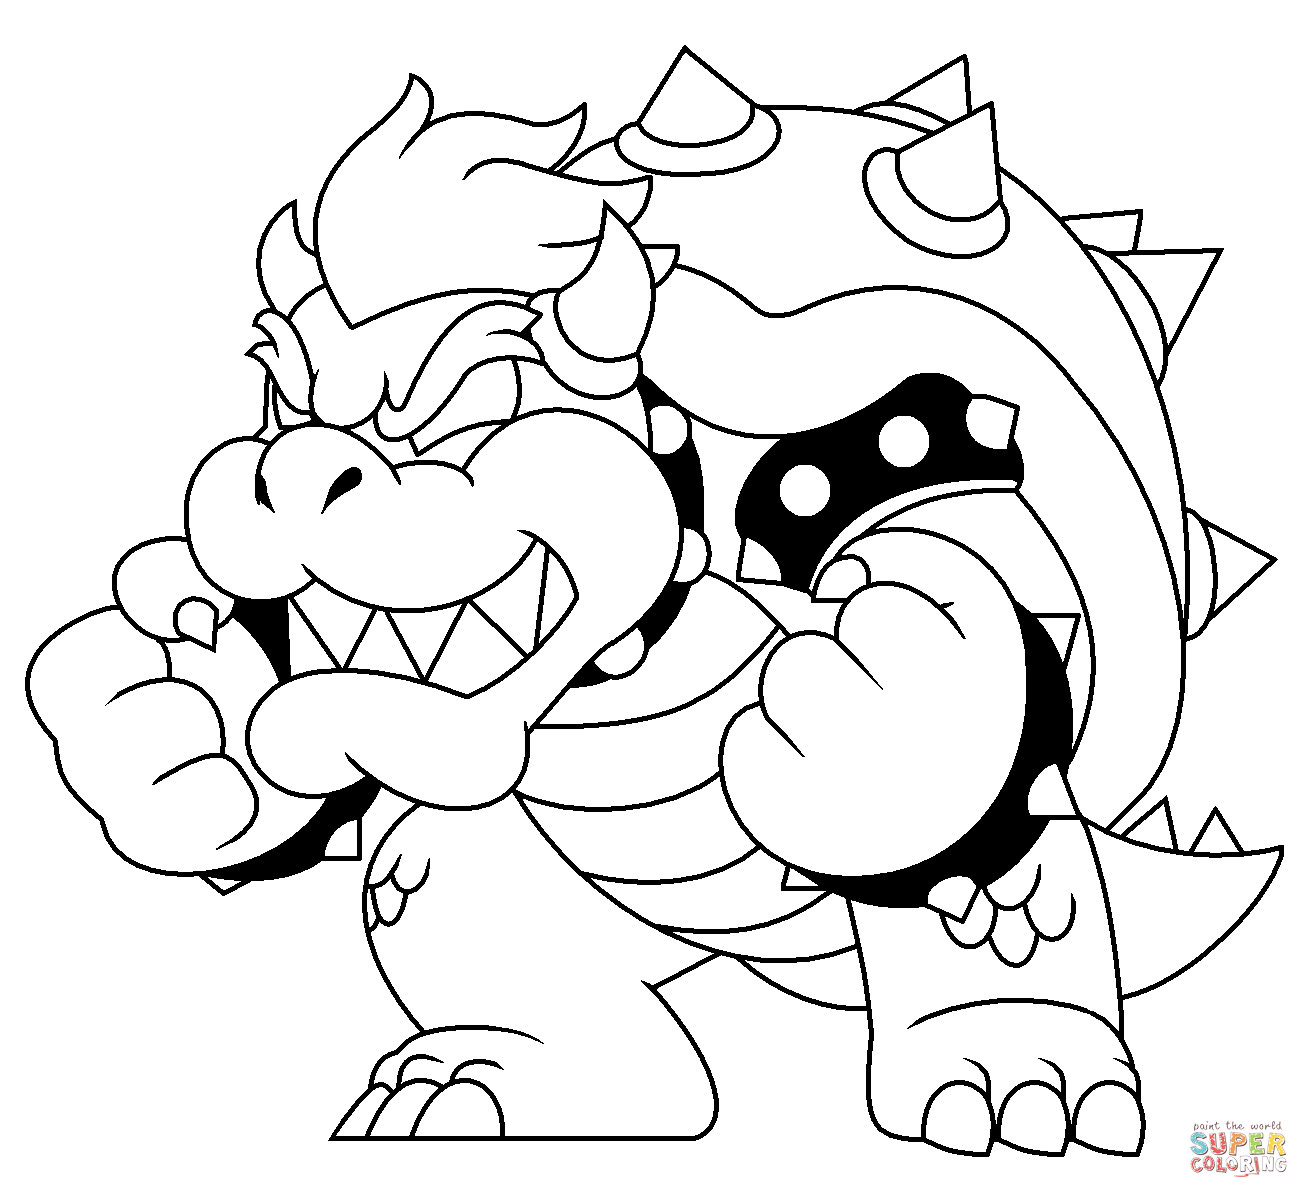 Bowser Coloring Pages
 Bowser coloring page